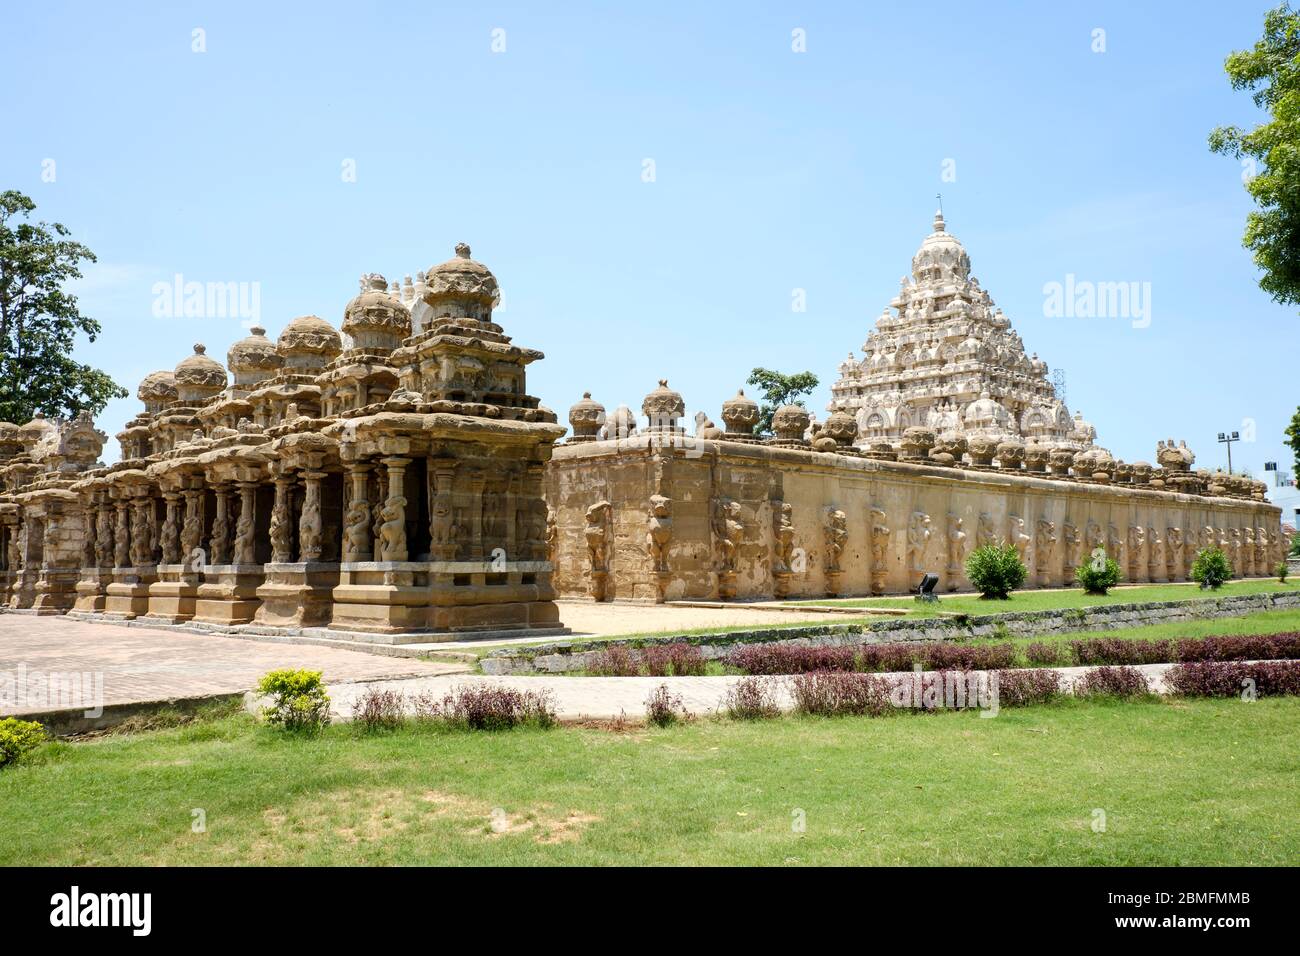 View of outer walls and sanctuary 'gopuram' tower (right) of Kailasanathar Temple, Kanchipuram, Tamil Nadu, India. Stock Photo